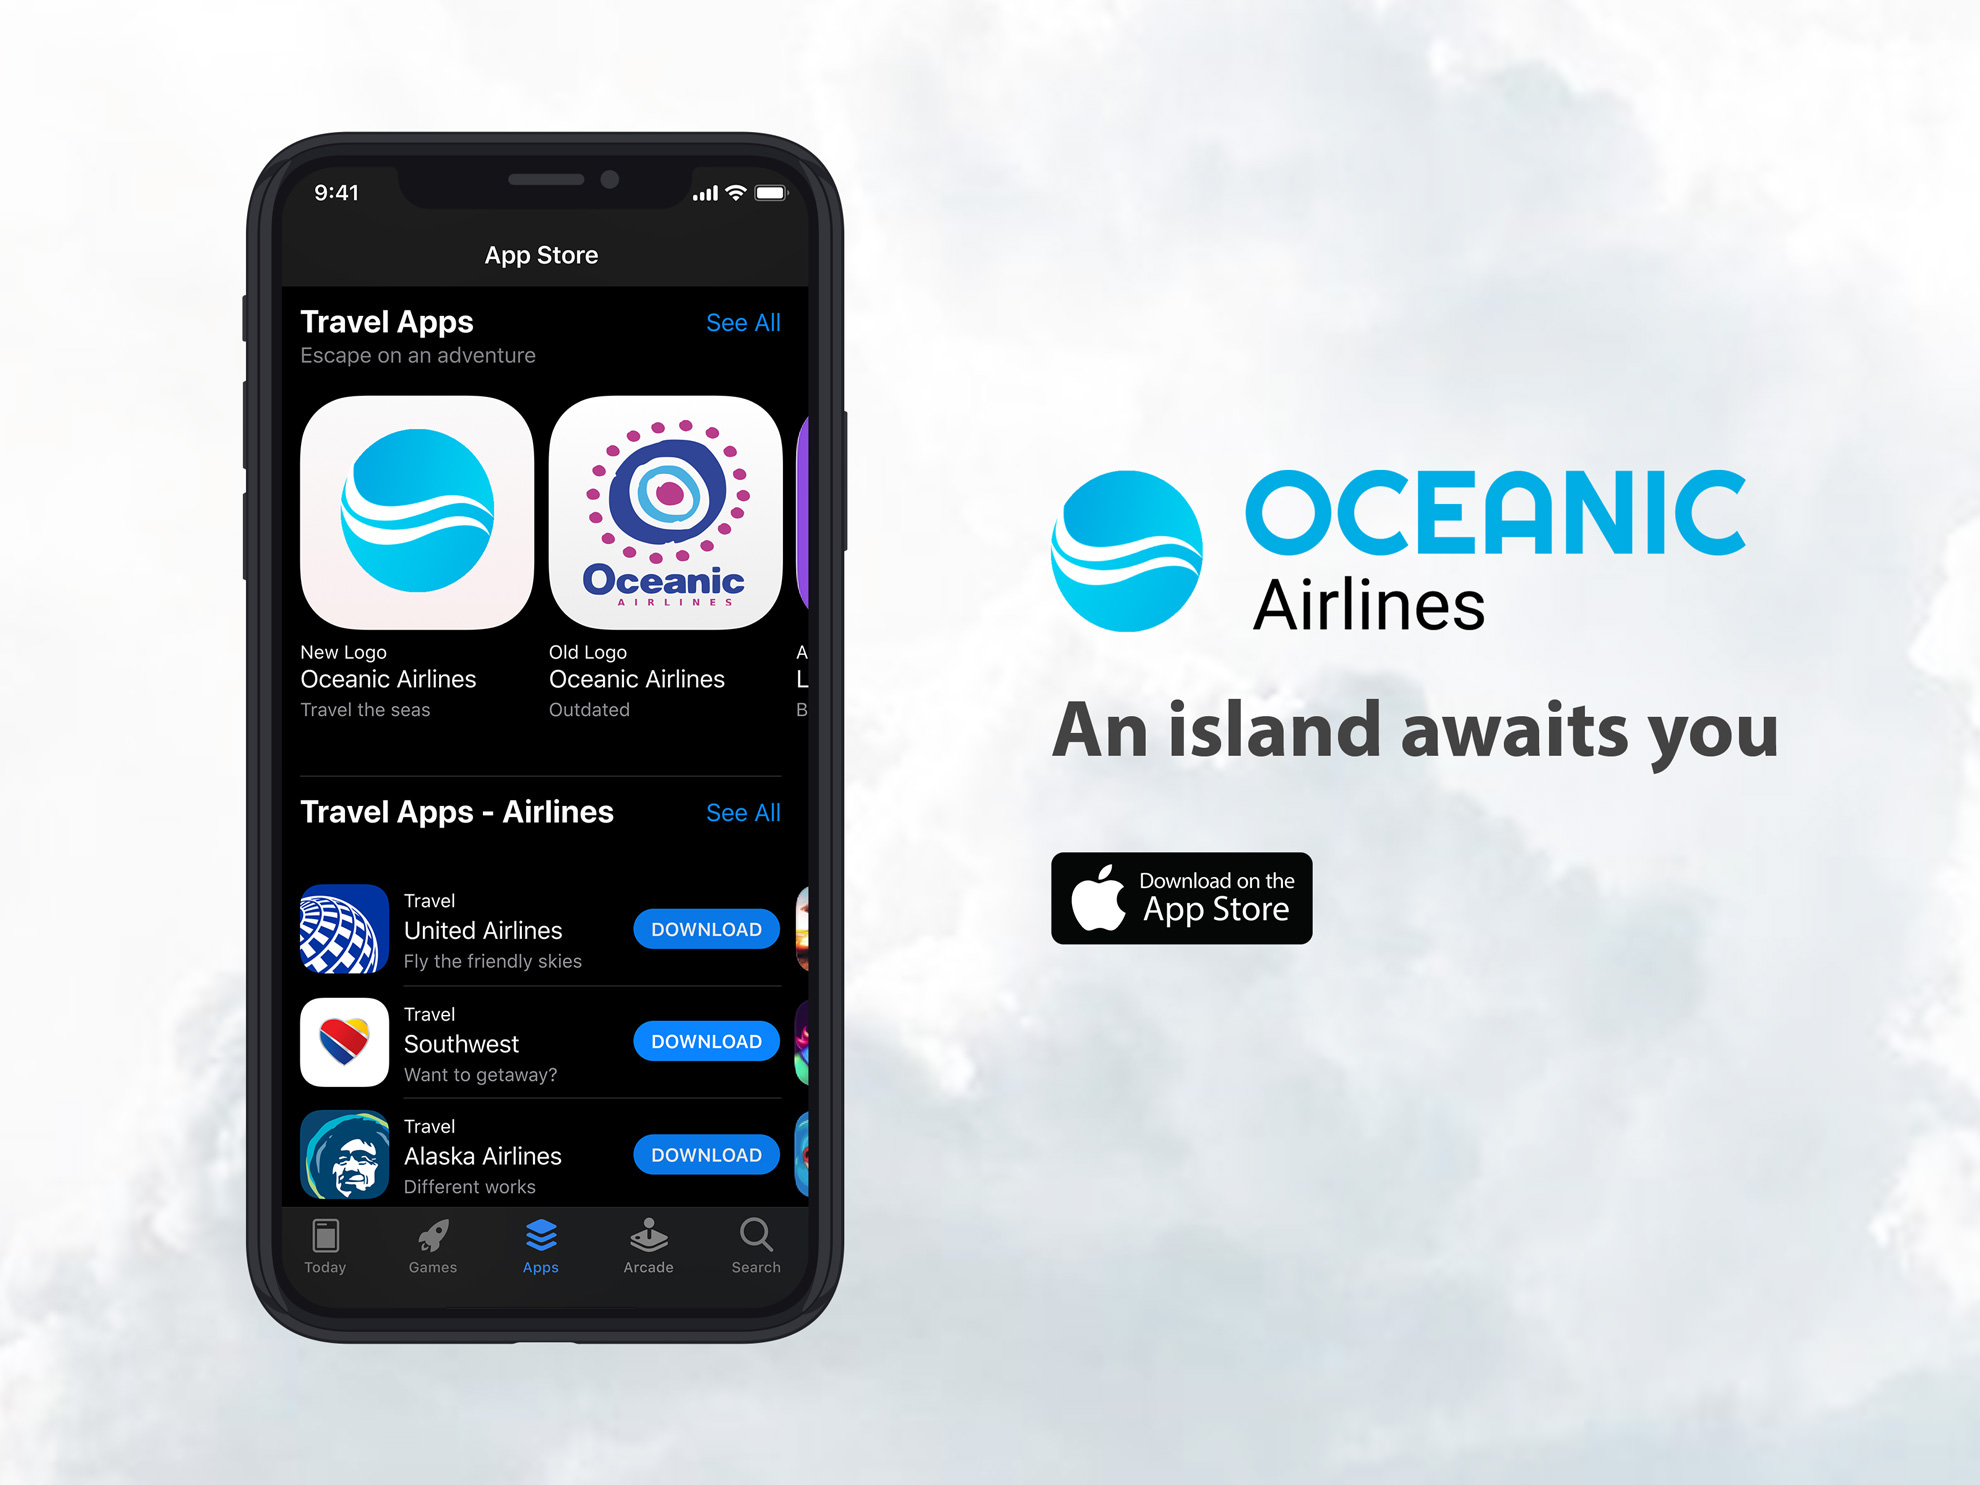 logo redesign of app icon for Oceanic Airlines from Lost on the appstore for design challenge 005